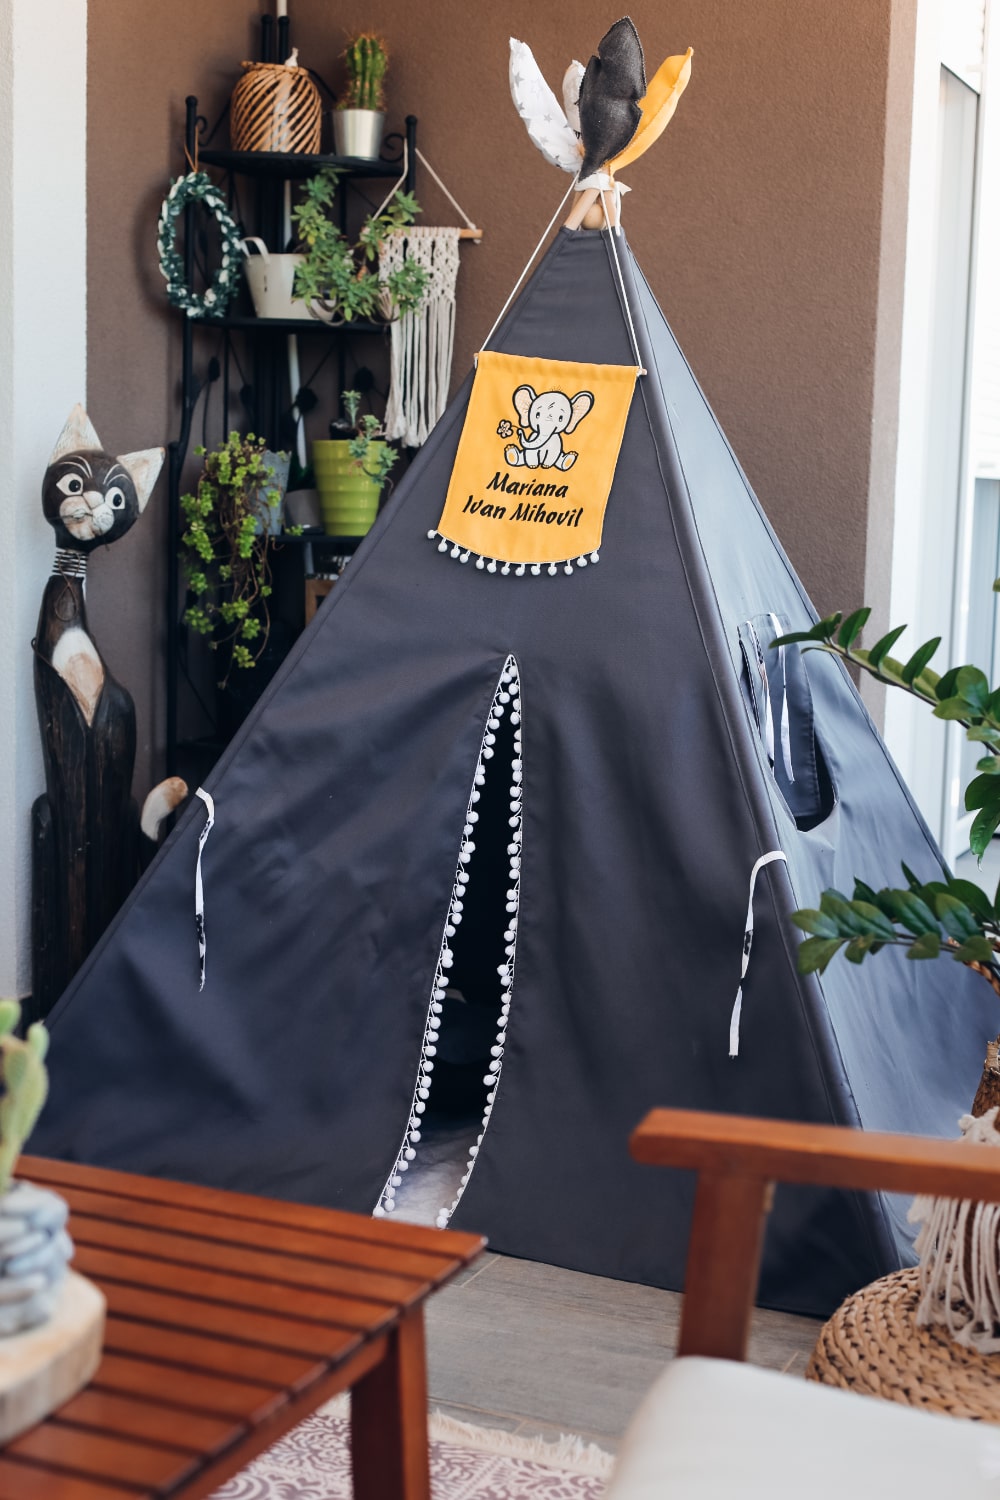 Personalized teepee tent for kids